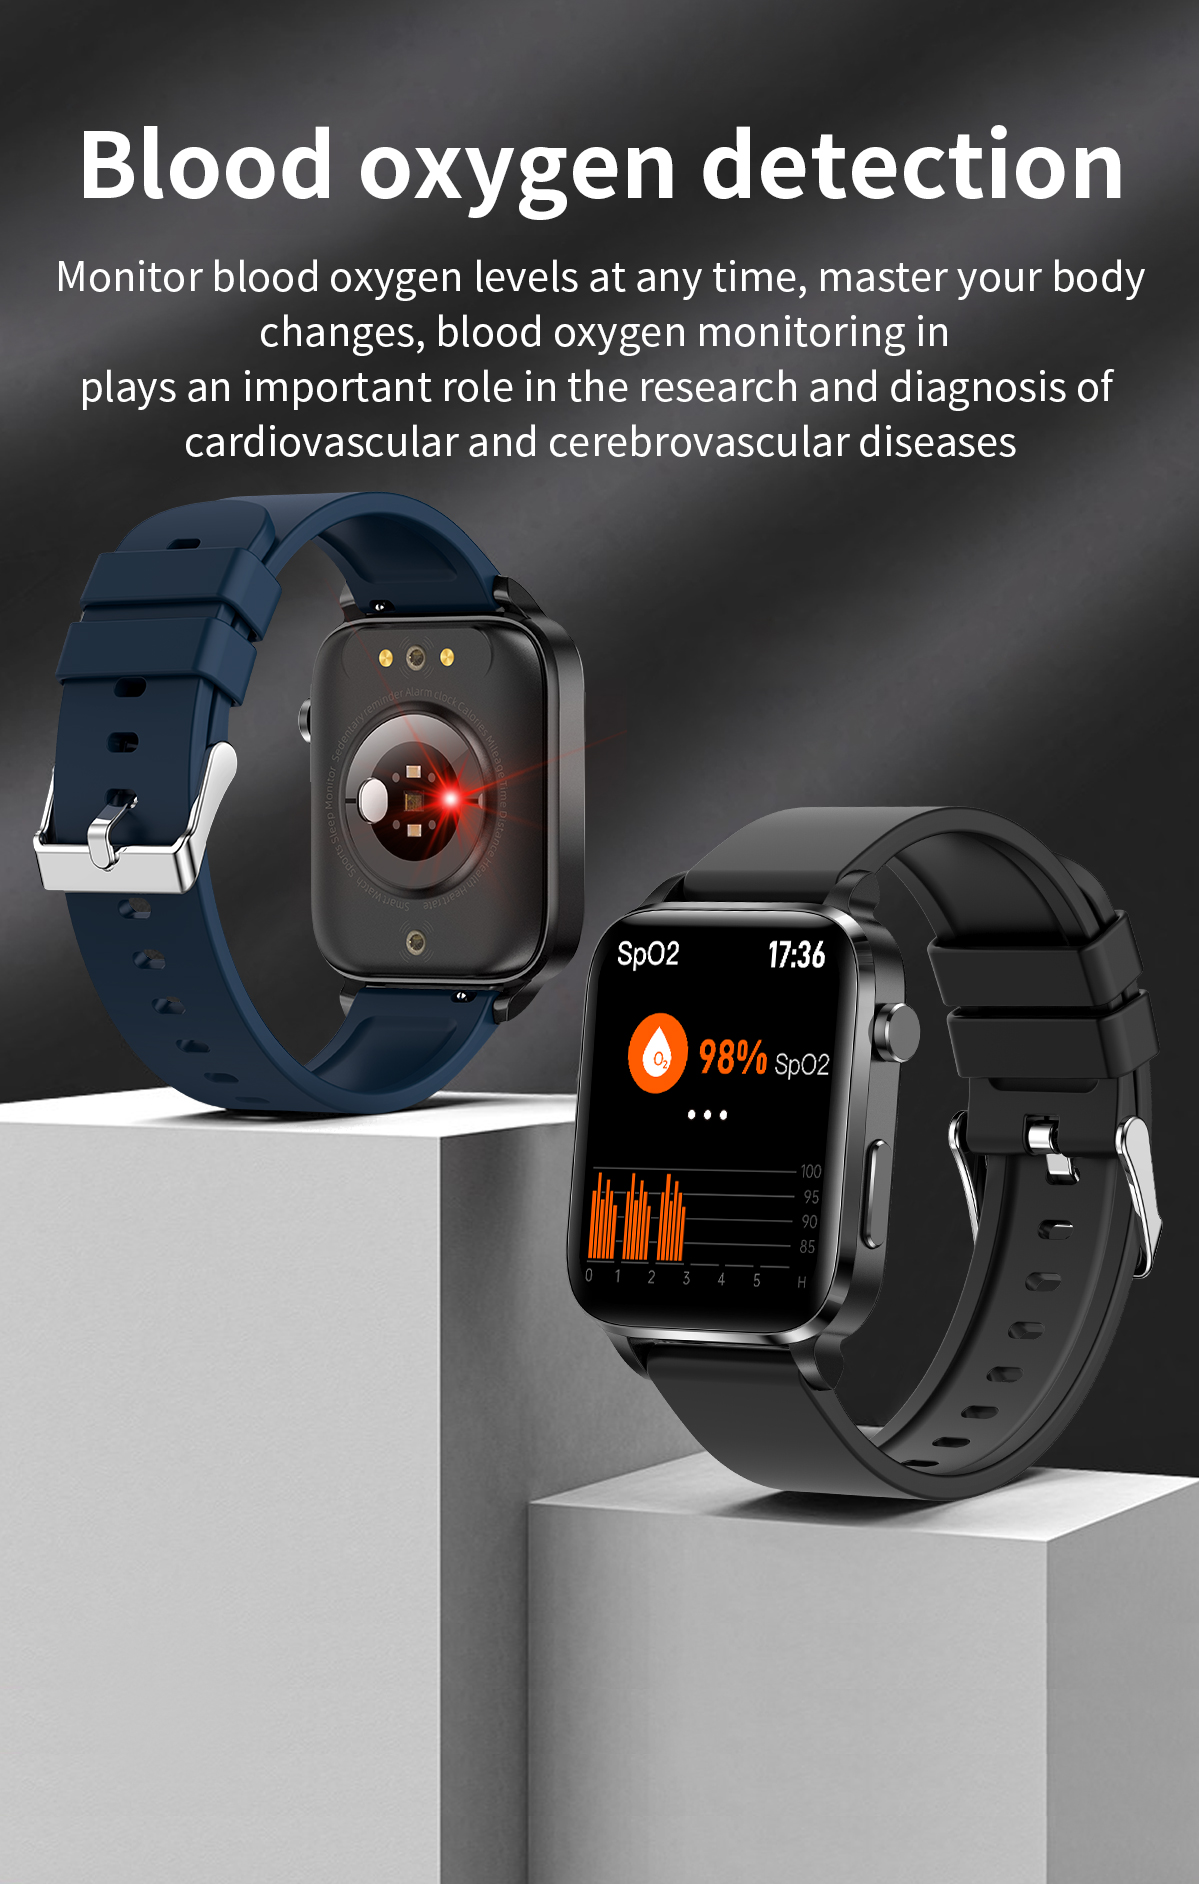 F100 1.7 inch HD Screen Dual Probe Laser Therapy Body Temperature Measurement Heart Rate Blood Pressure SpO2 Monitor Fitness Tracker Long Standby BT5.0 Smart Watch